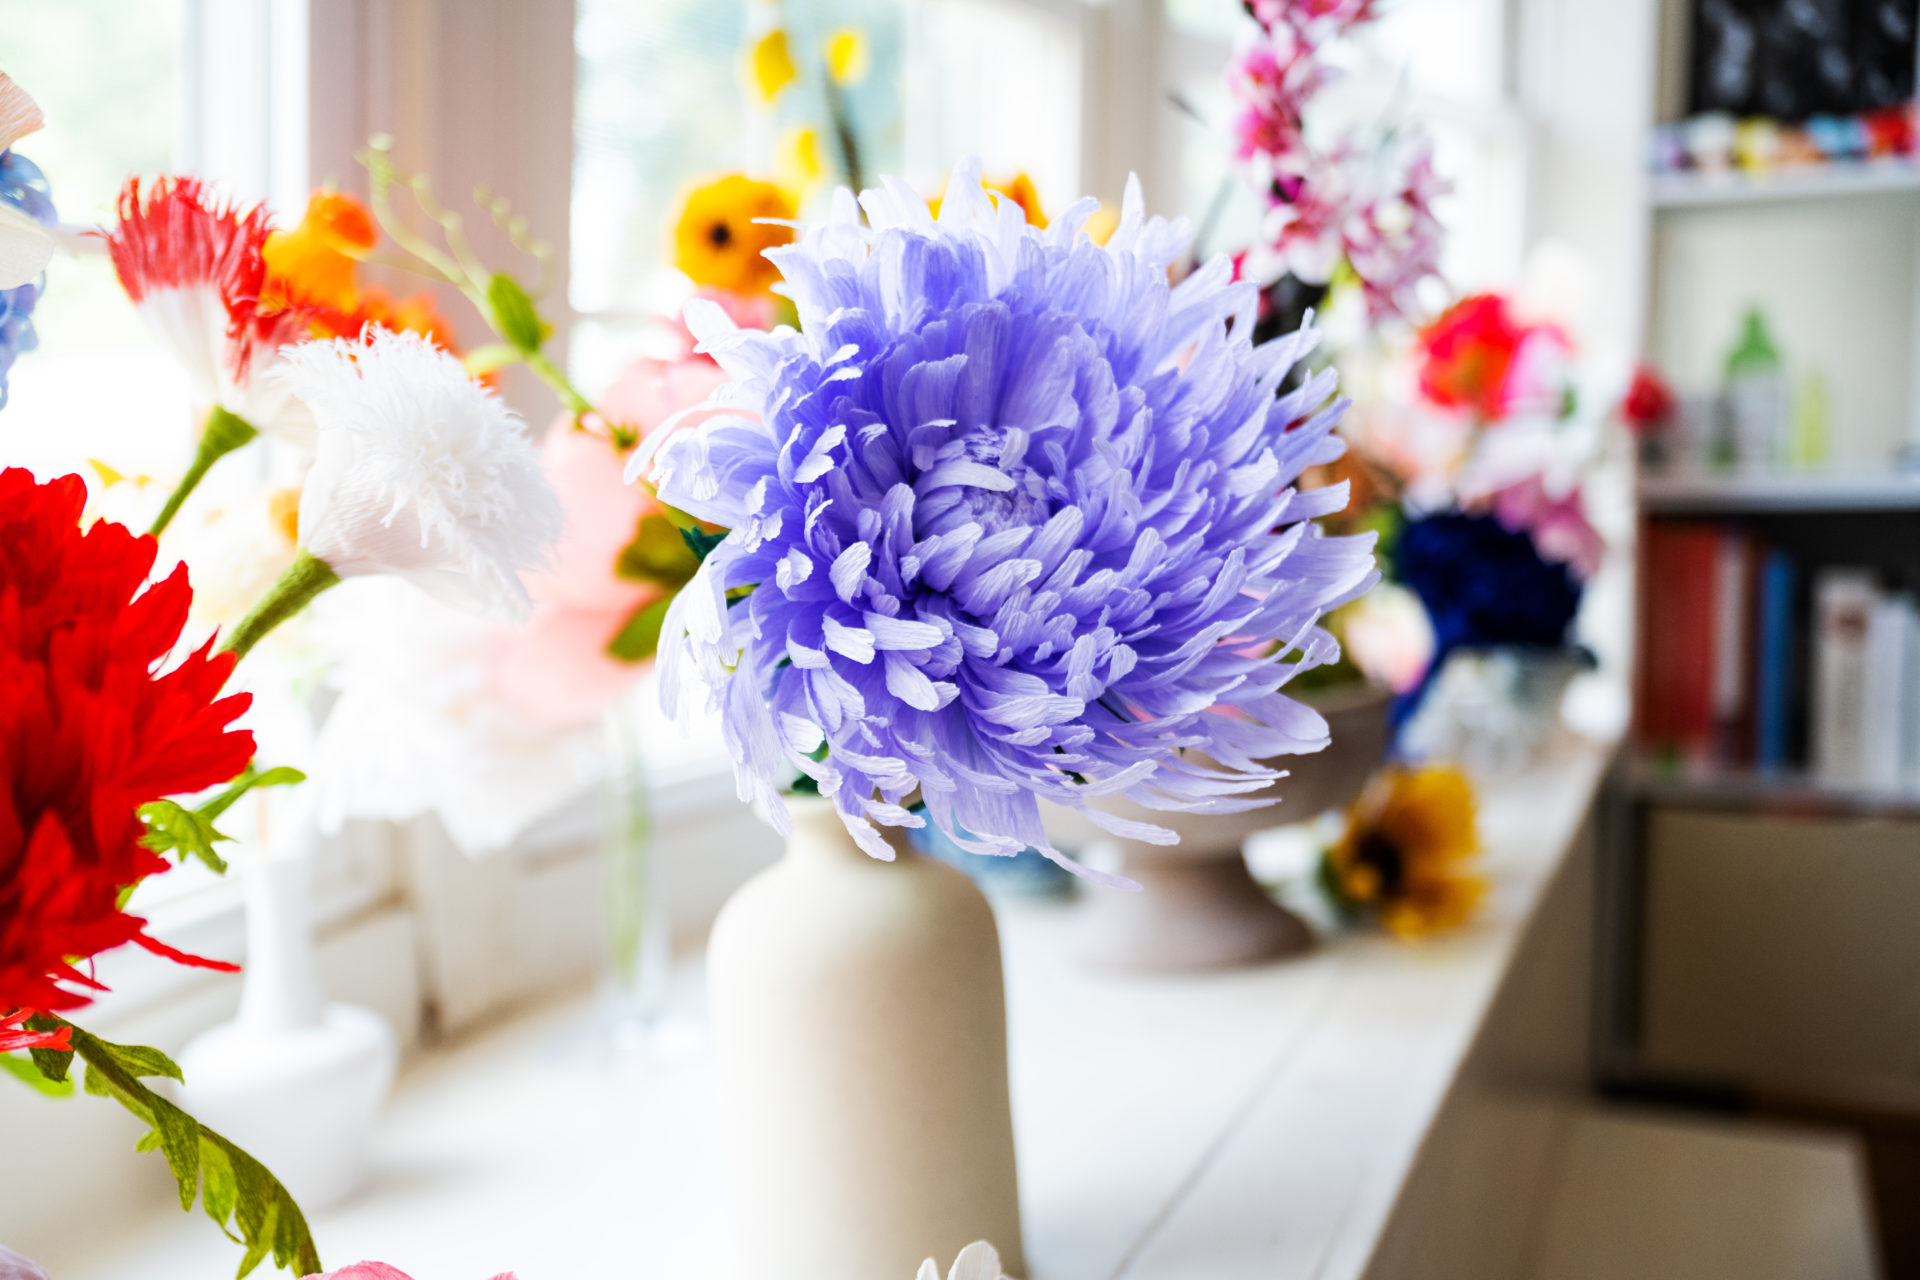 An assortment of colorful paper flowers in white vase in vases on a shelf.